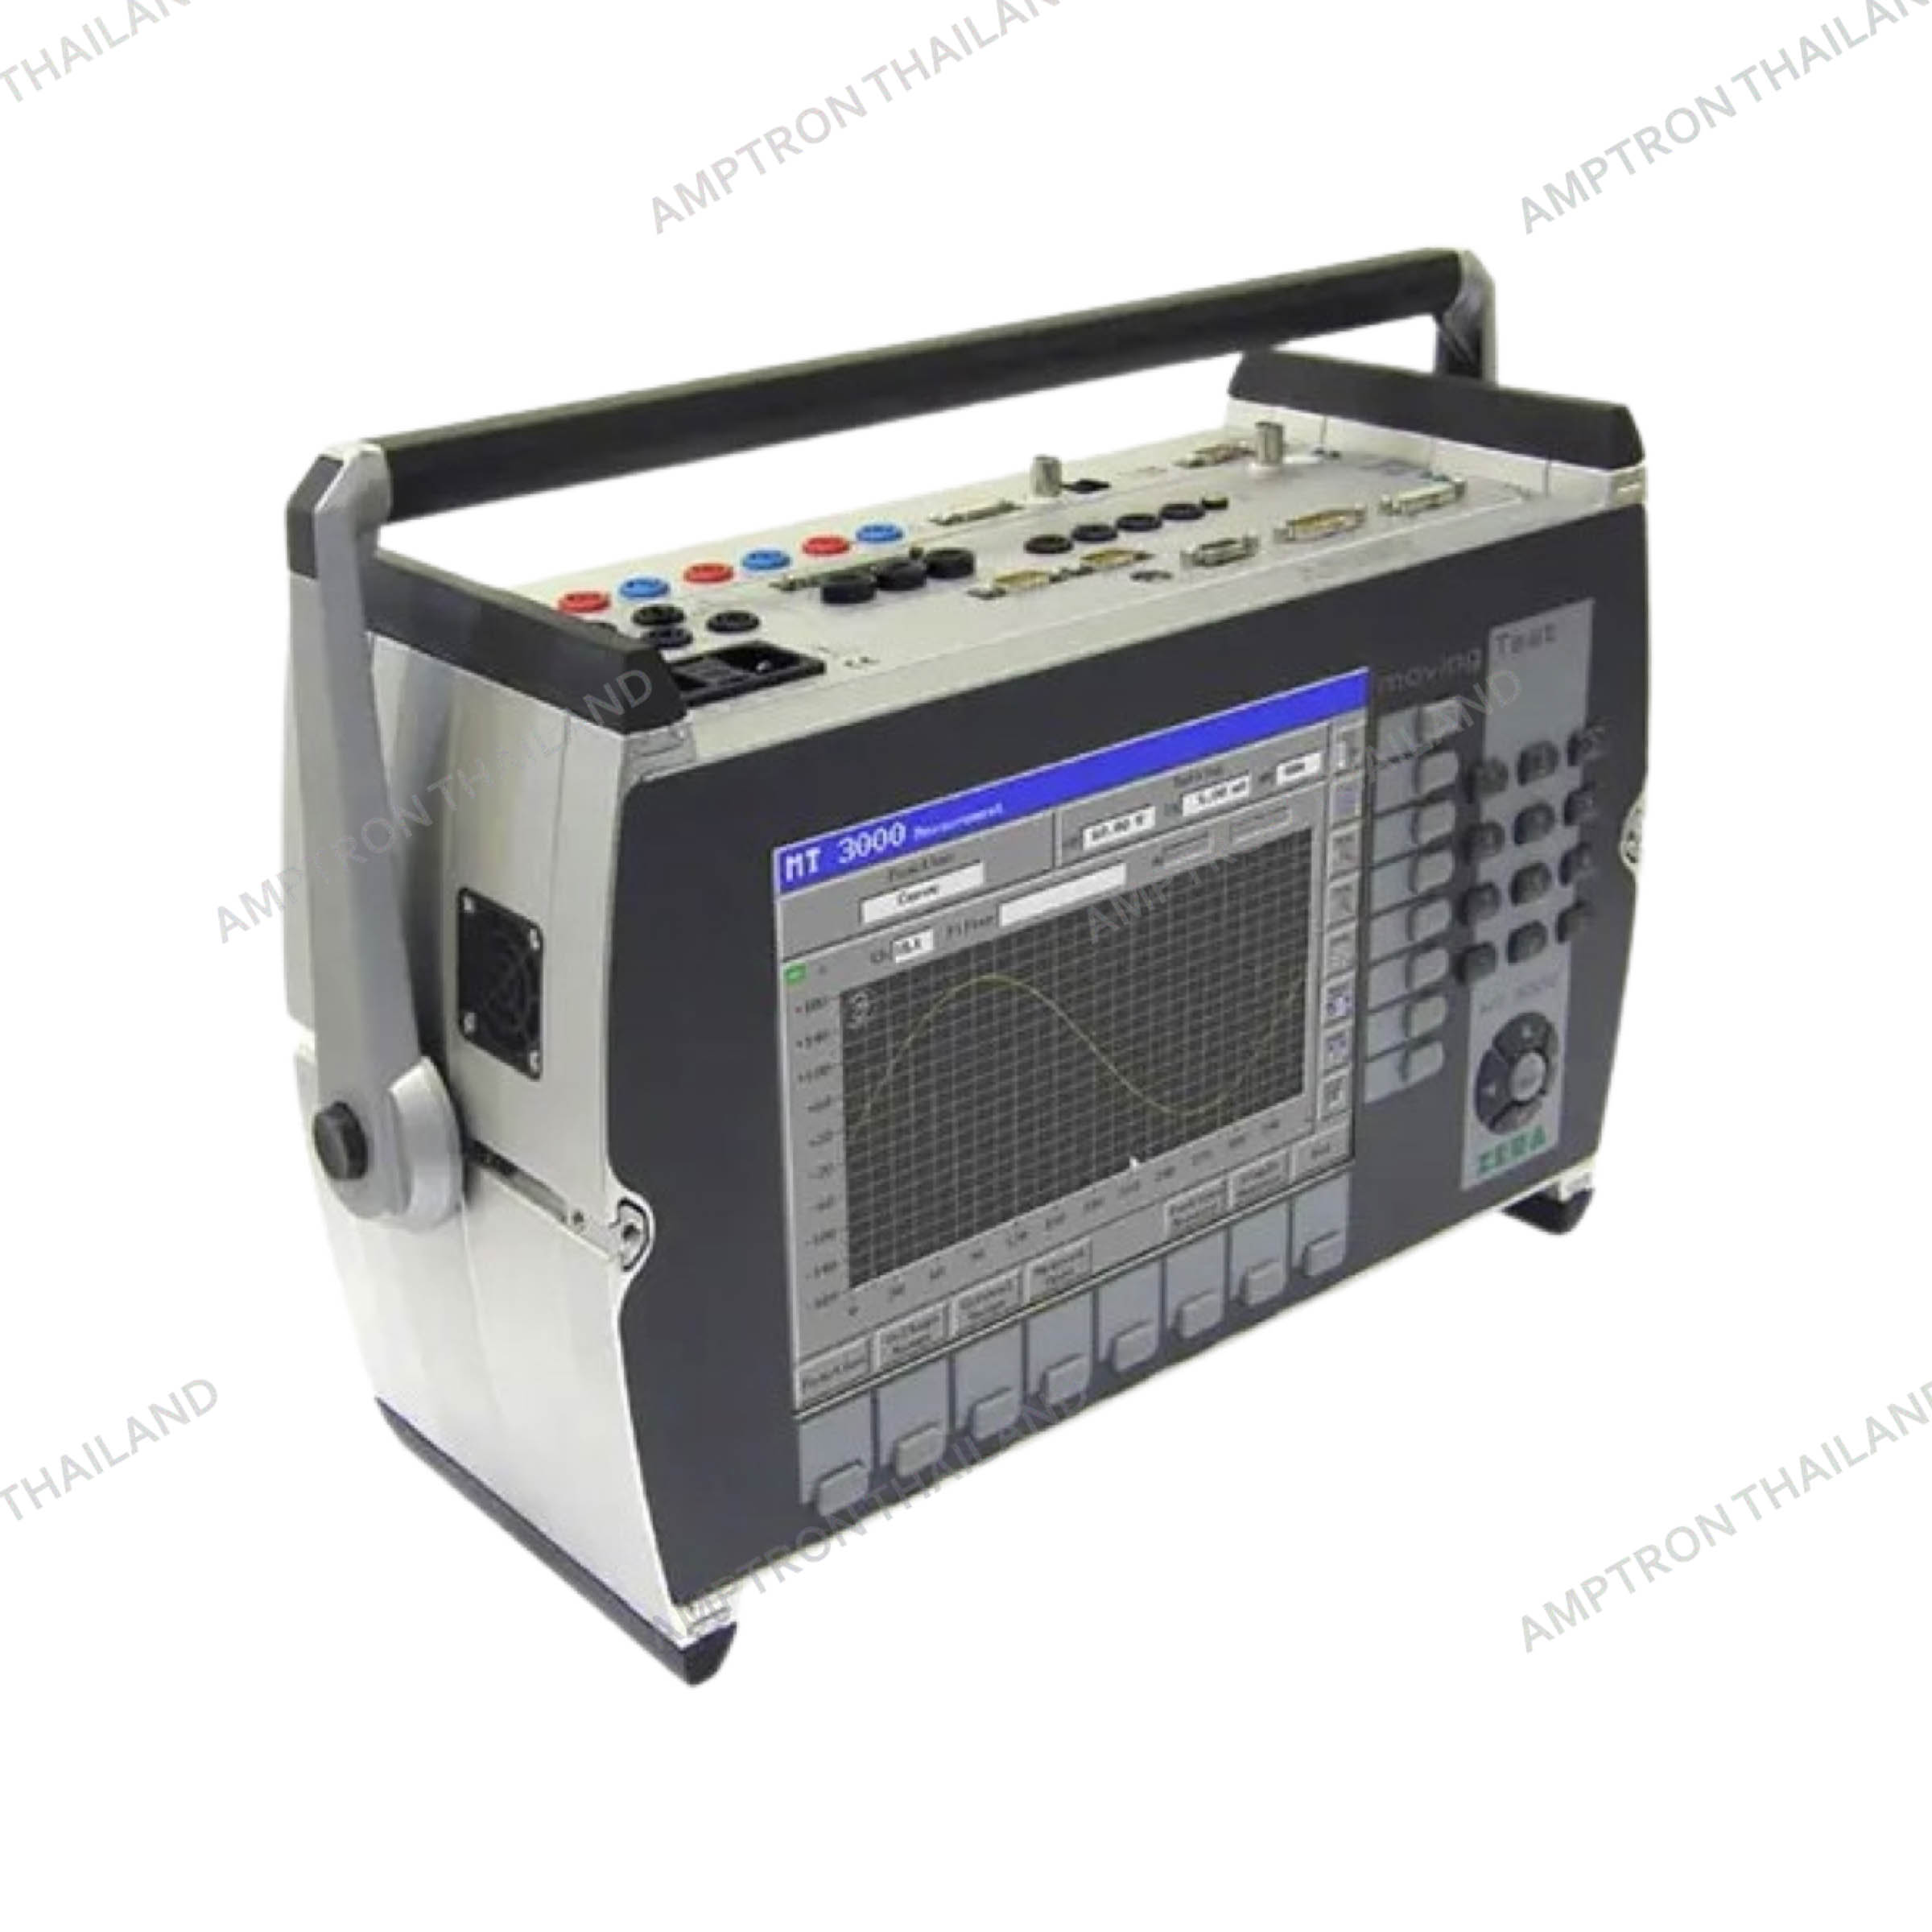 MT3000 Portable Reference Meter